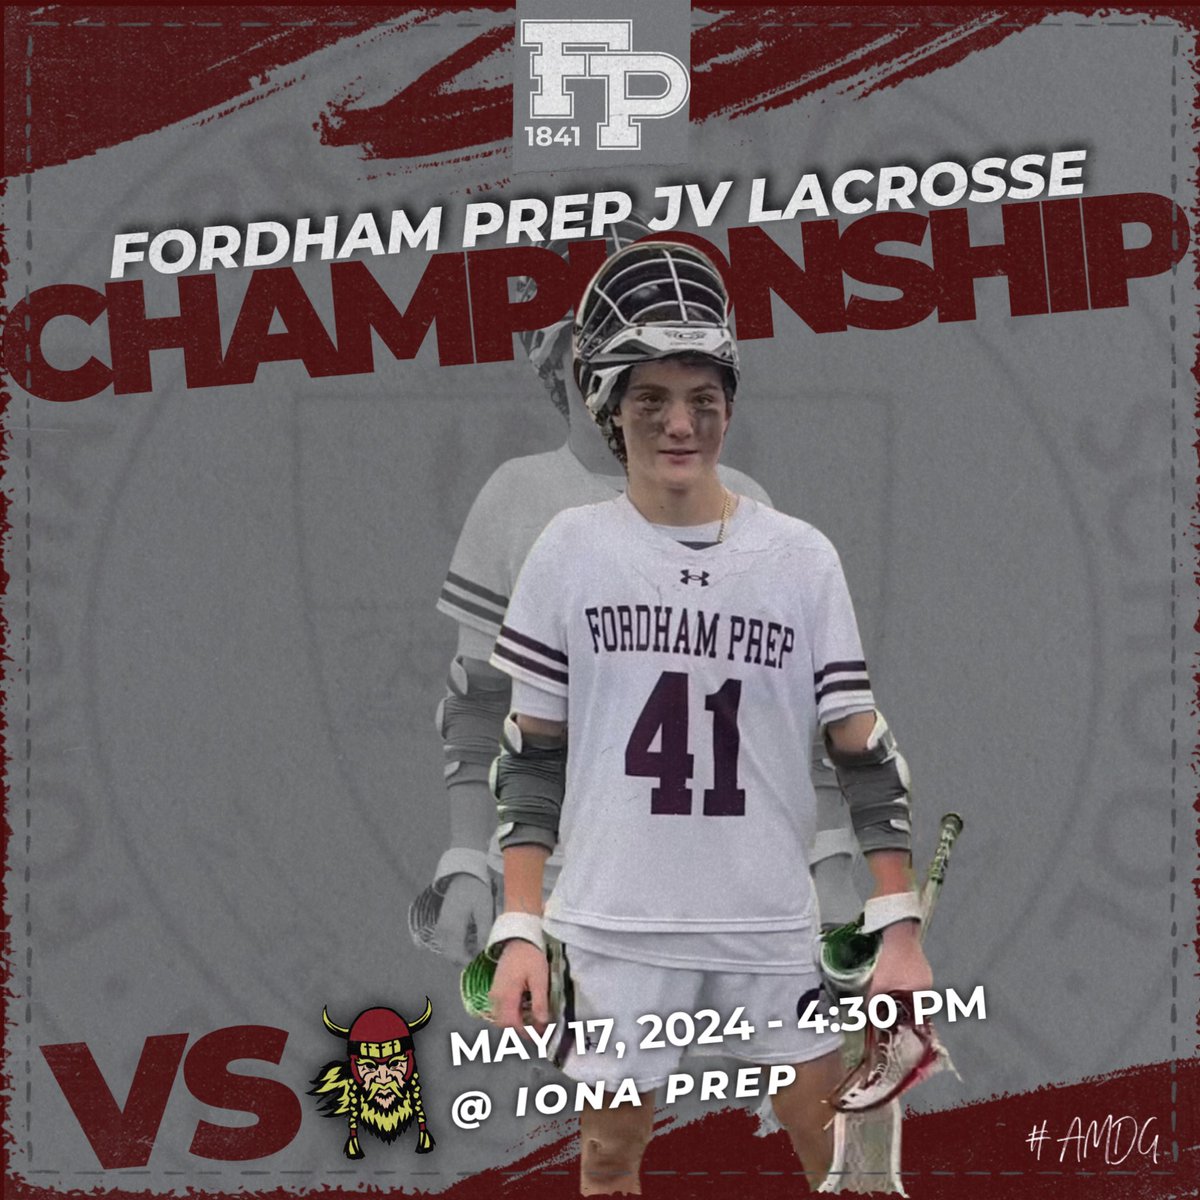 It’s Championship Friday! Good Luck to our @fordhampreplax JV team who will play for the CHSAA “AA” JV Championship today against @ionaprepsports. The Rams will compete at 4:30 PM at Iona Prep. Livestream: events.locallive.tv/conferences/CH… Go Rams! 🐏🥍 #AMDG #GoRams